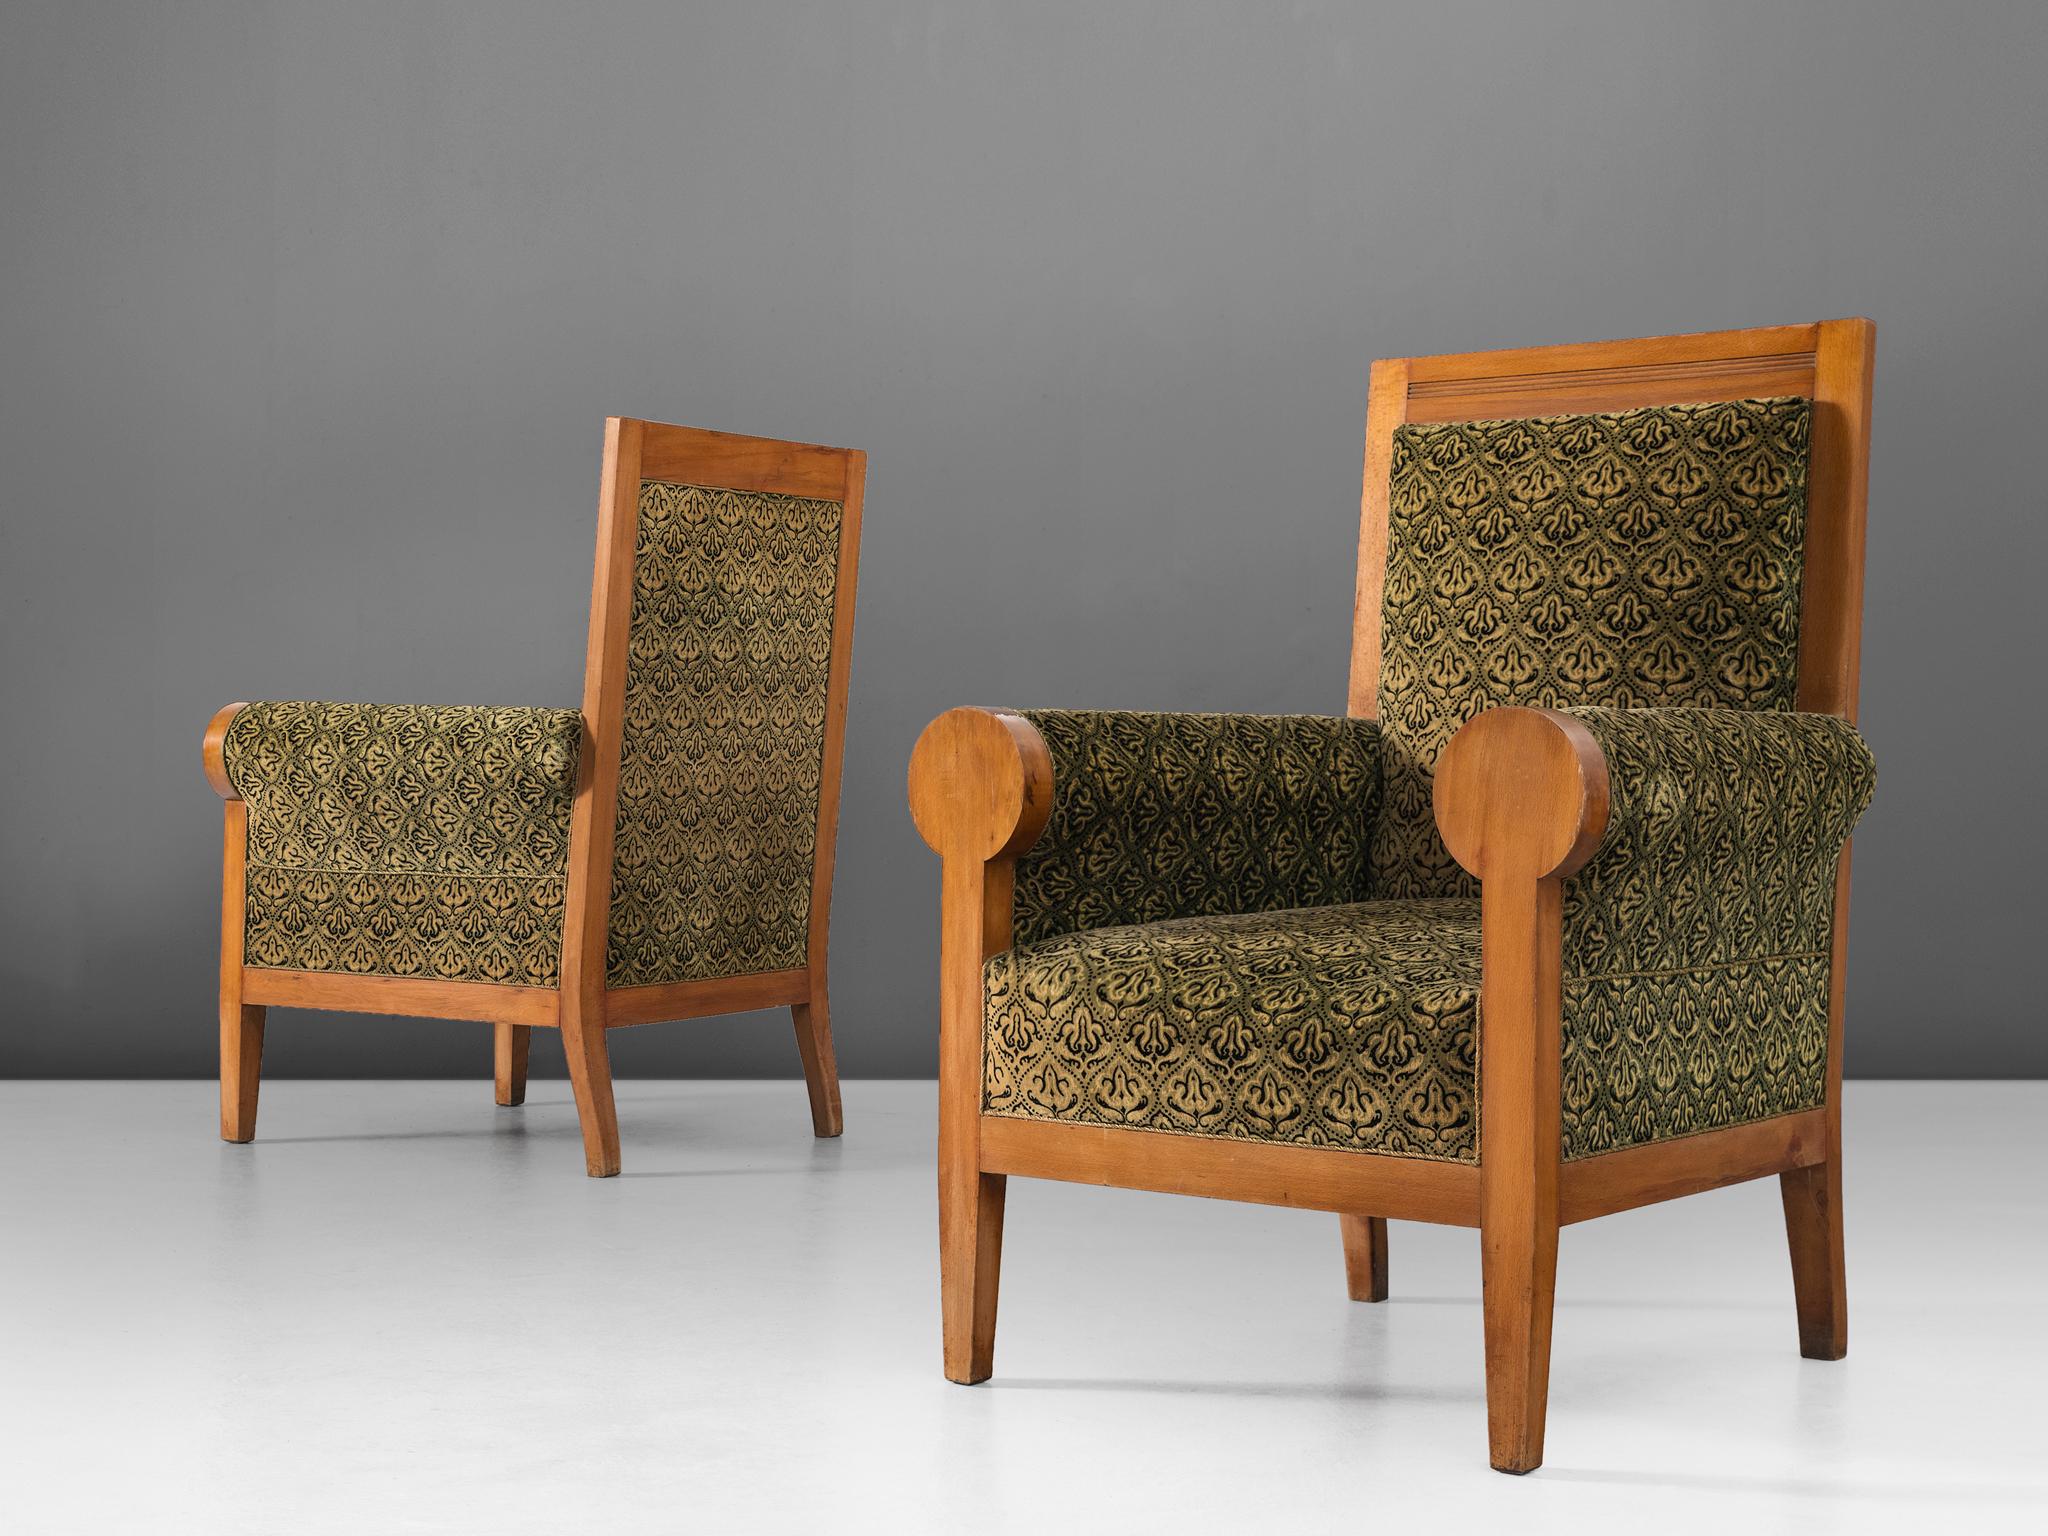 Set of two armchairs, in beech and fabric, Italy, 1950s.

Two stately armchairs in green fabric upholstery. These lounge chairs have a majestic appearance, due their high back and luxurious upholstery. The rounded armrests emphasize this royal